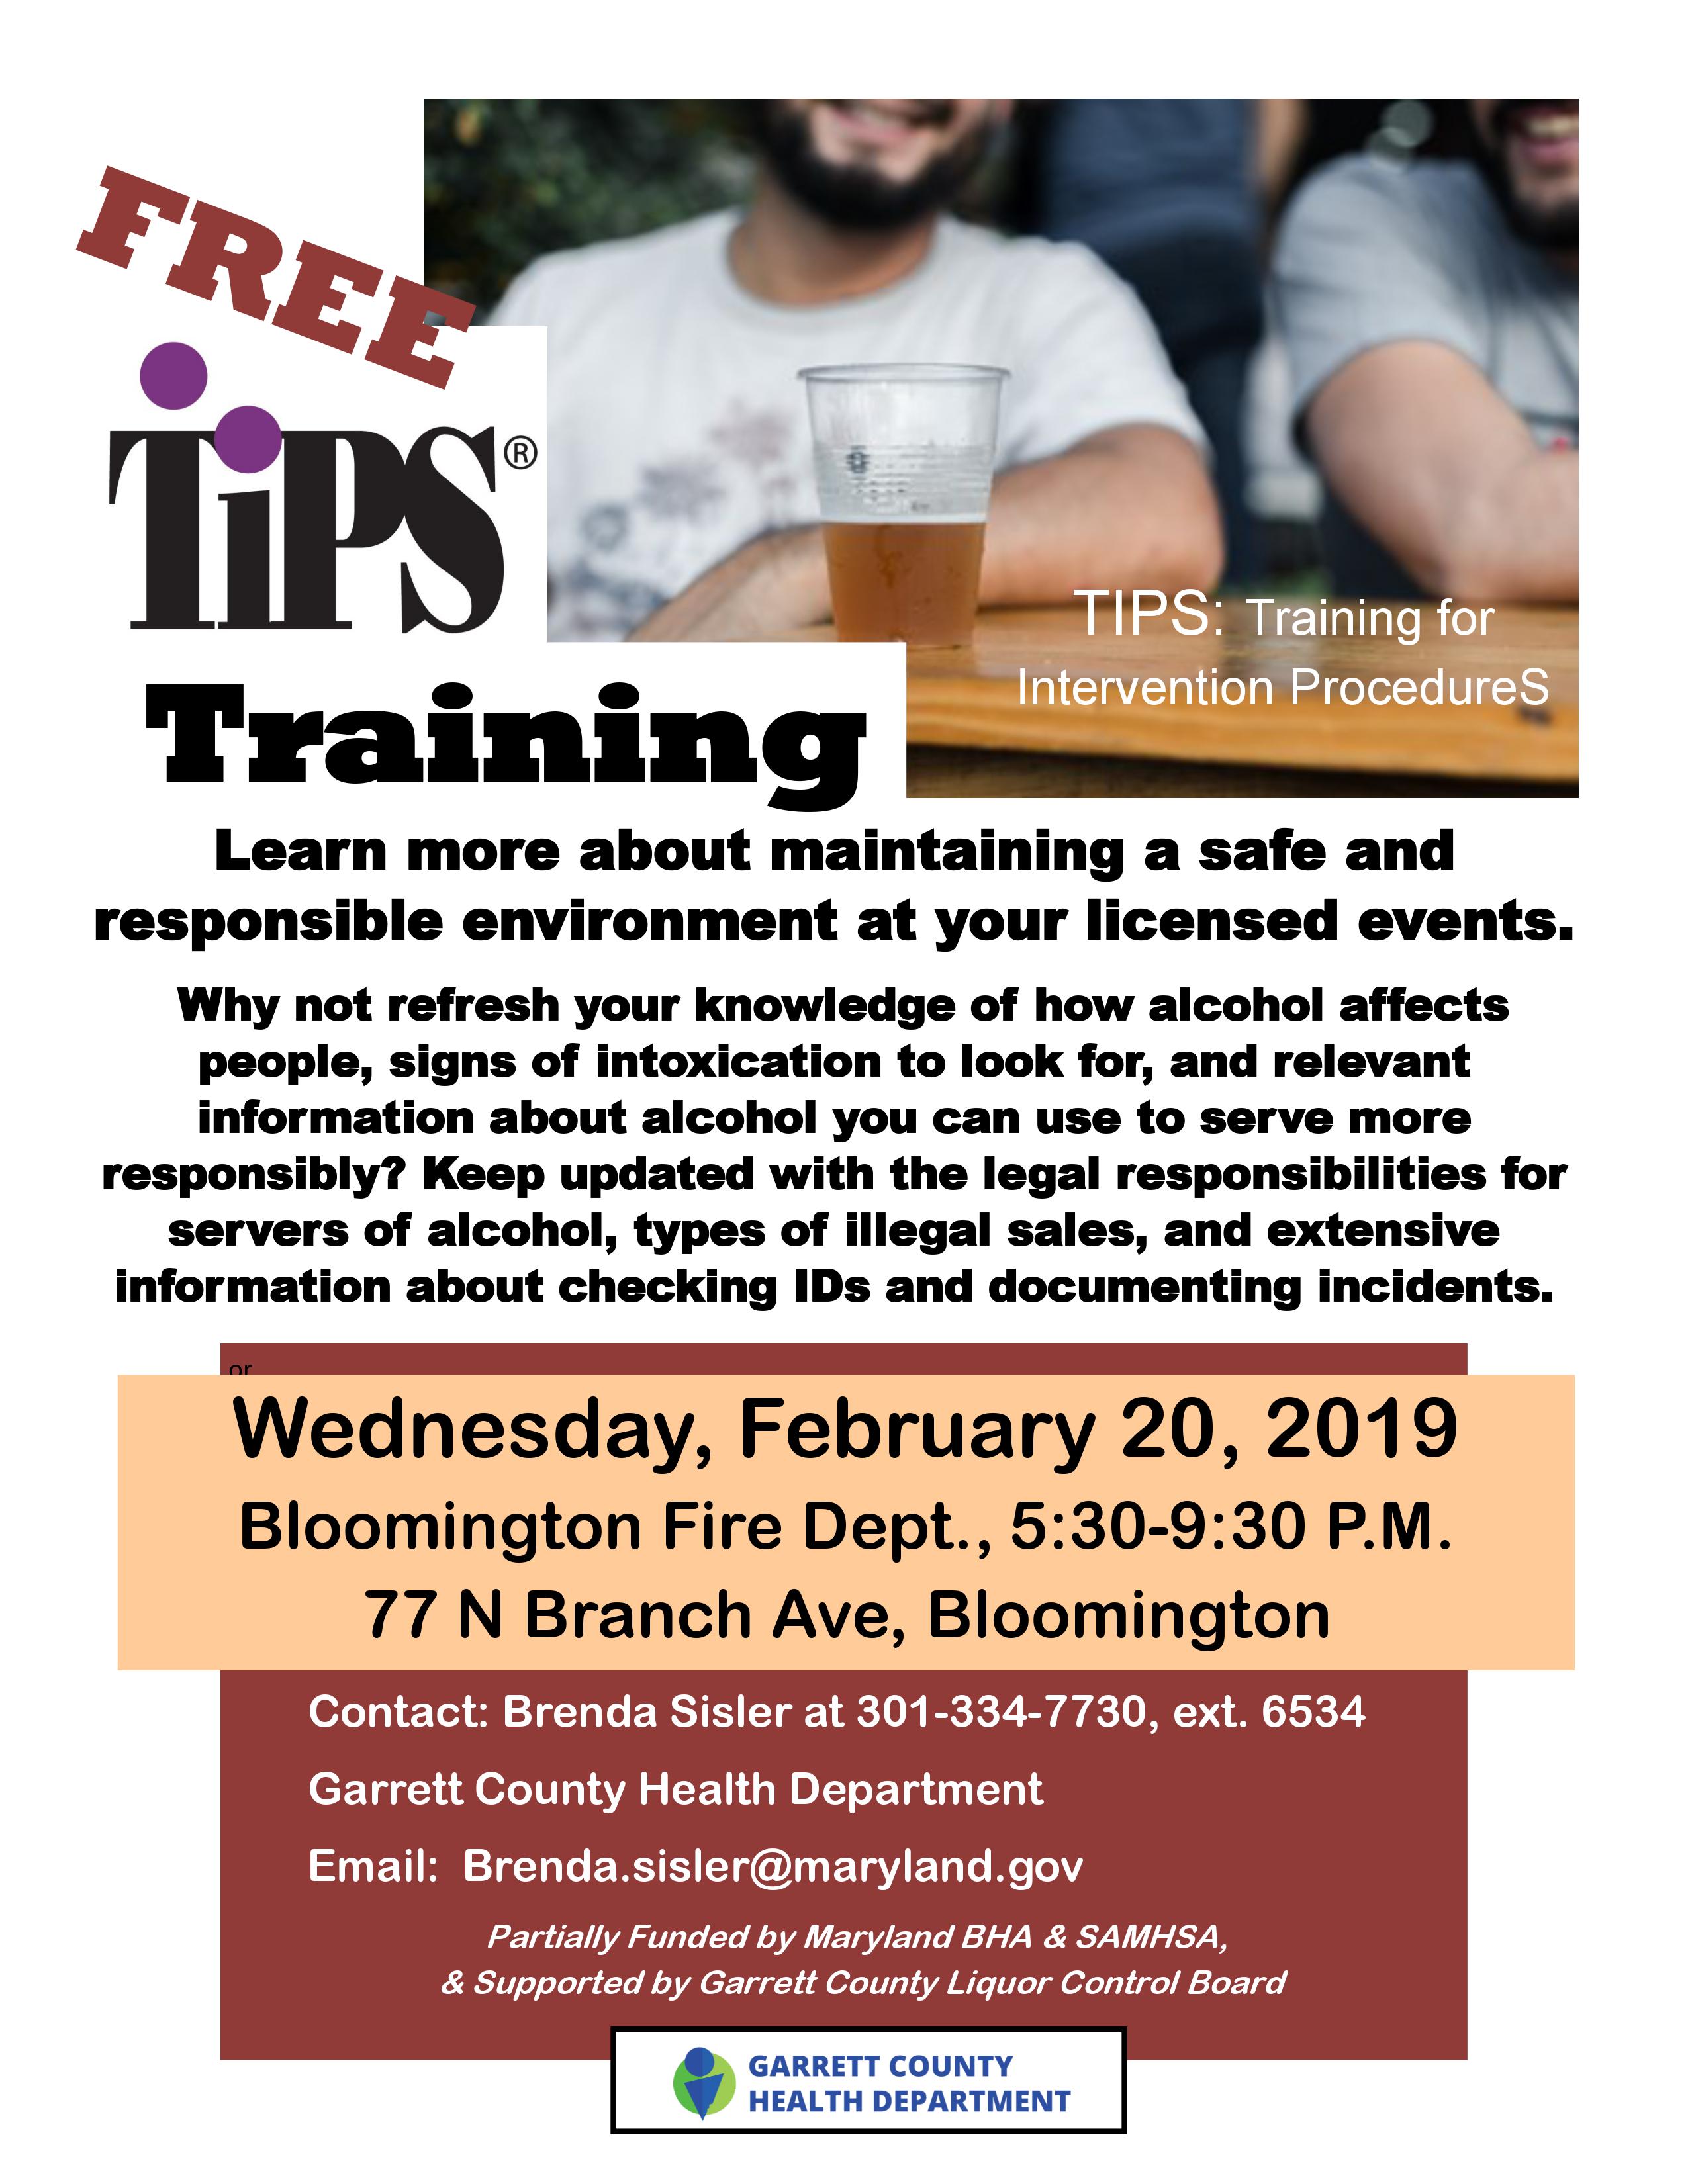 Two FREE TIPS Trainings Offered by the Garrett County Health Department!